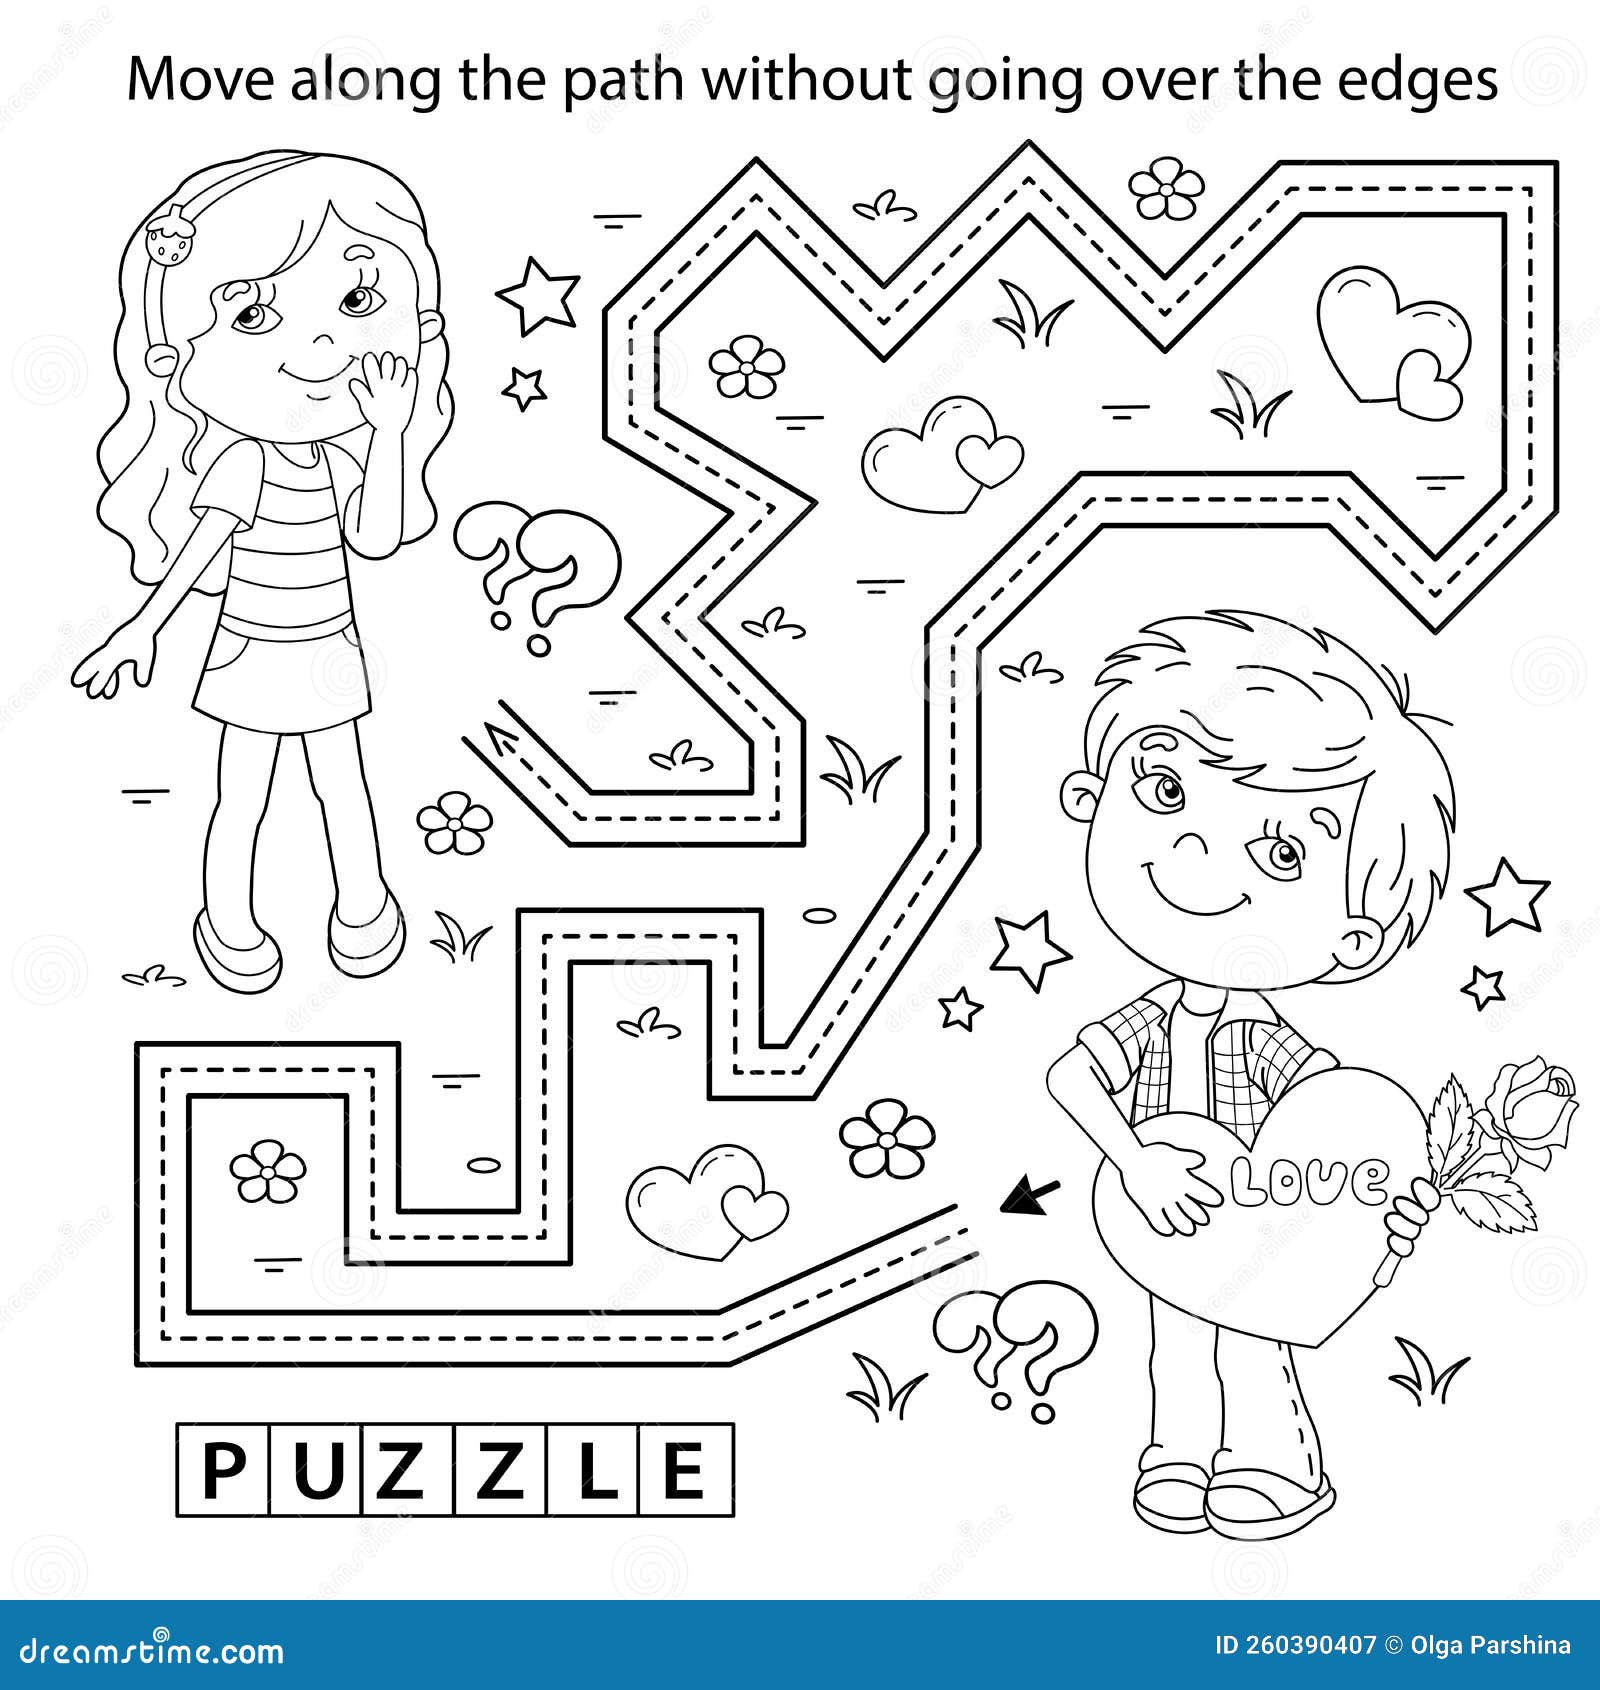 Fill in the Blank: Drawing and Coloring Book for Kids: Let's learn and have  fun! How to draw with half-fill coloring paper: creative kids ages 4-8 by  SeoYoung Honeyful